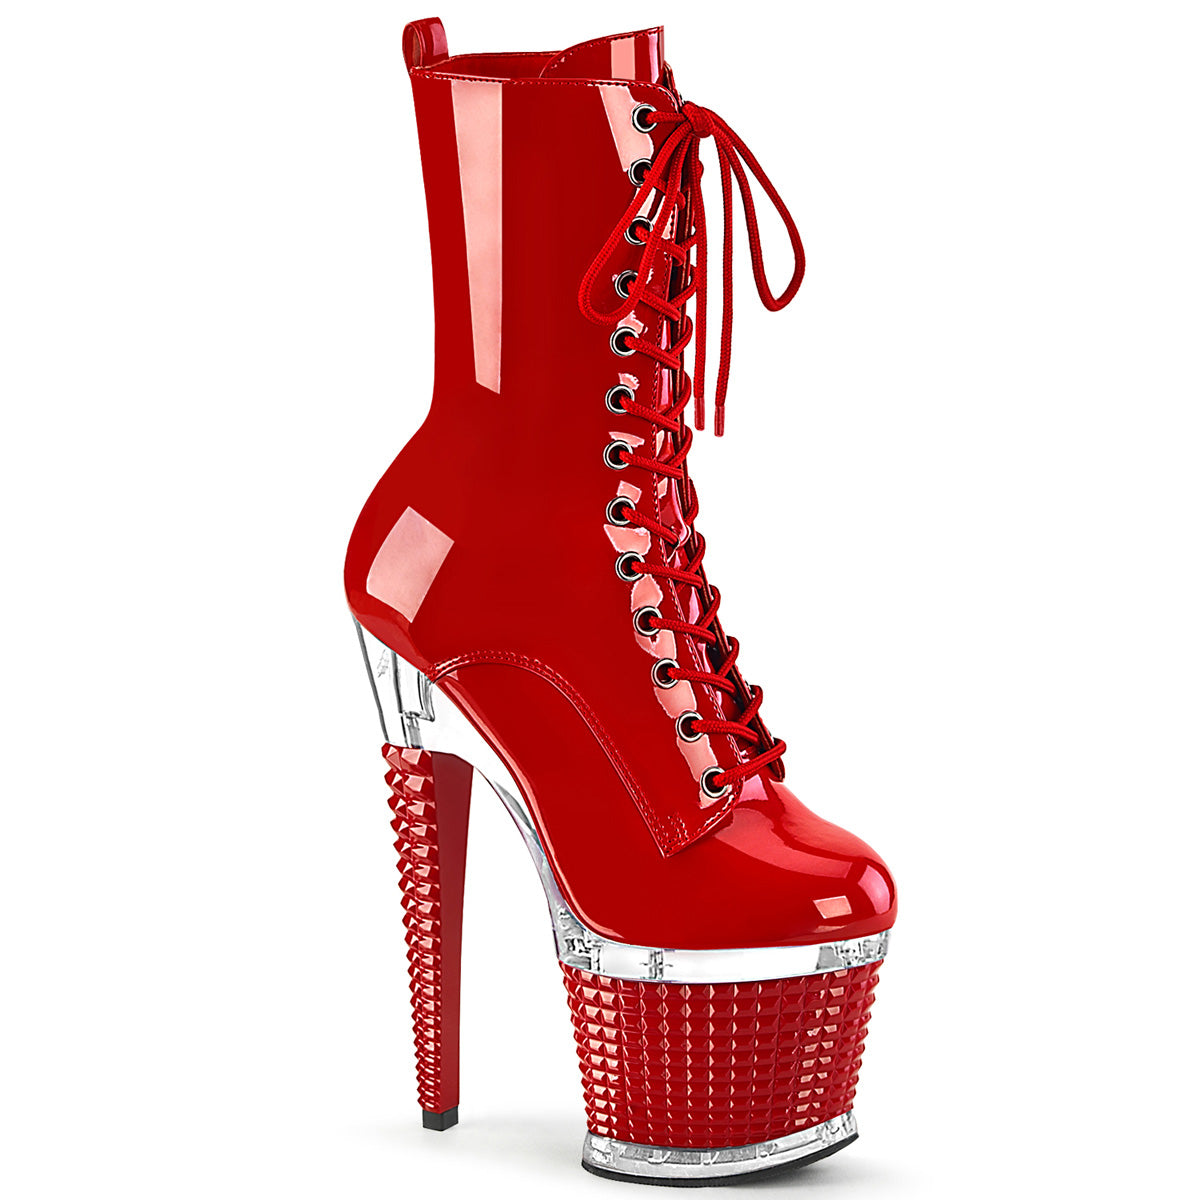 SPECTATOR-1040 Red/Clear Red Ankle Boots